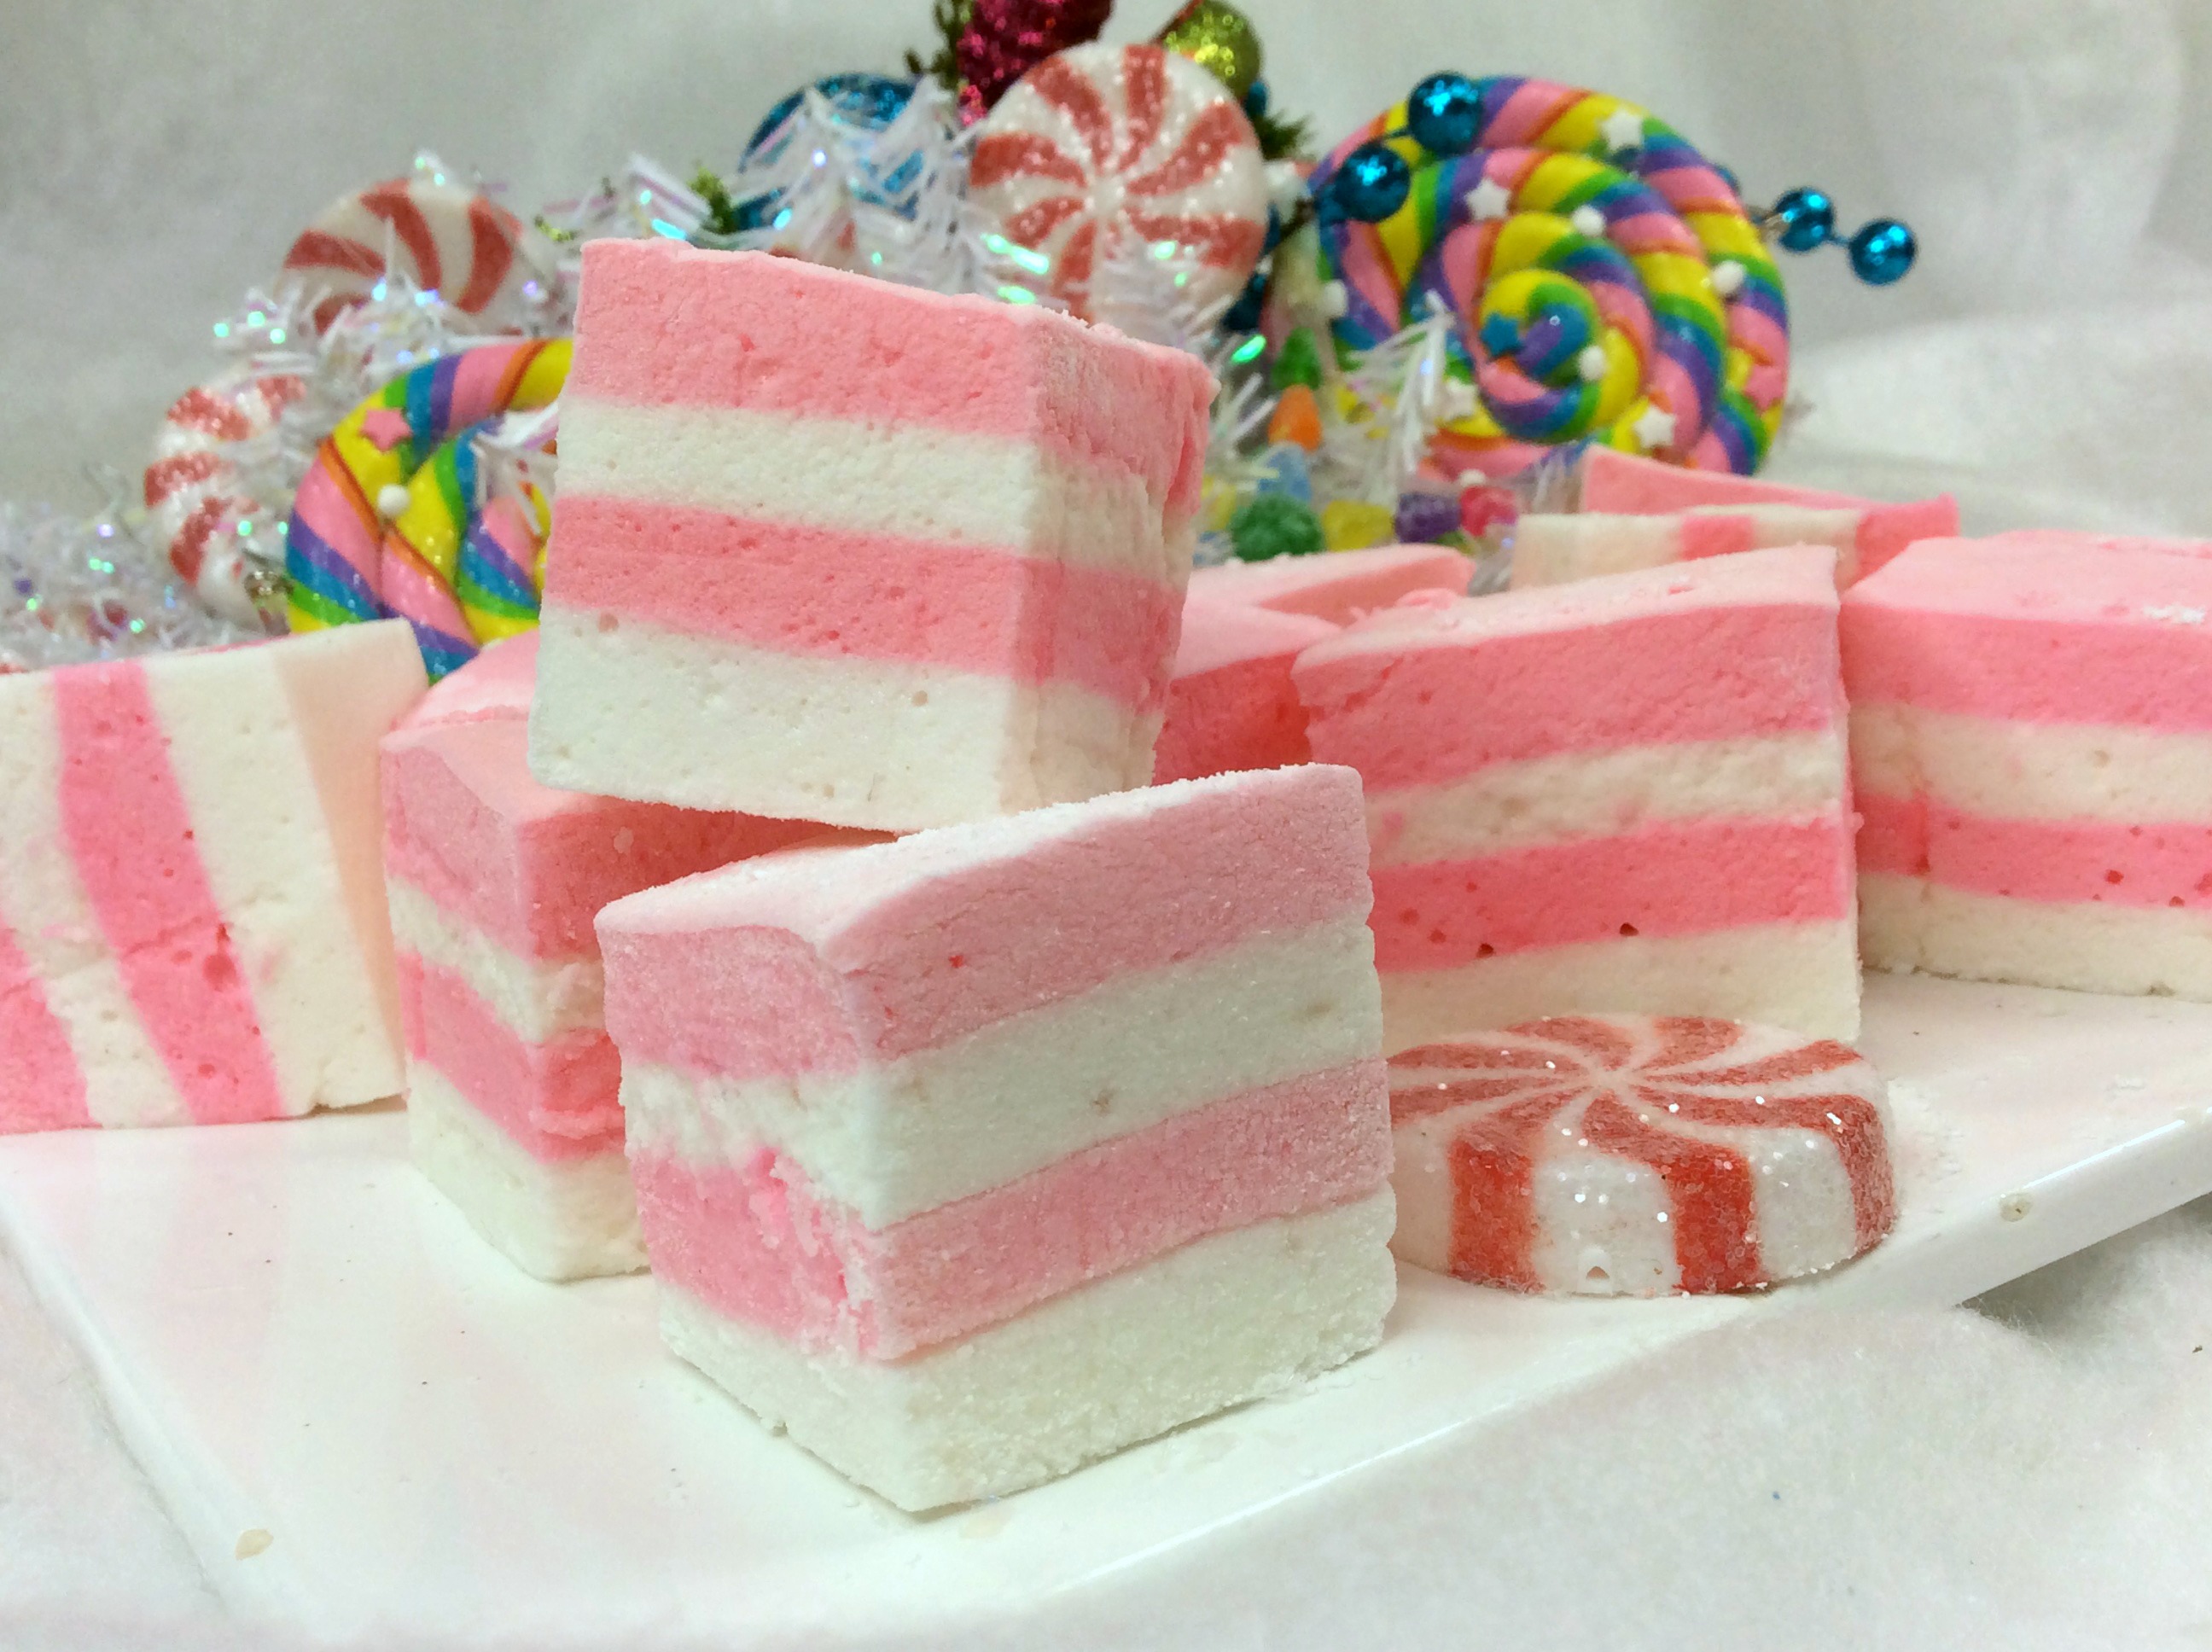 Sugar Plum Marshmallows Gluten Free and Dairy Free | The Nutcracker and the Four Realms Recipe